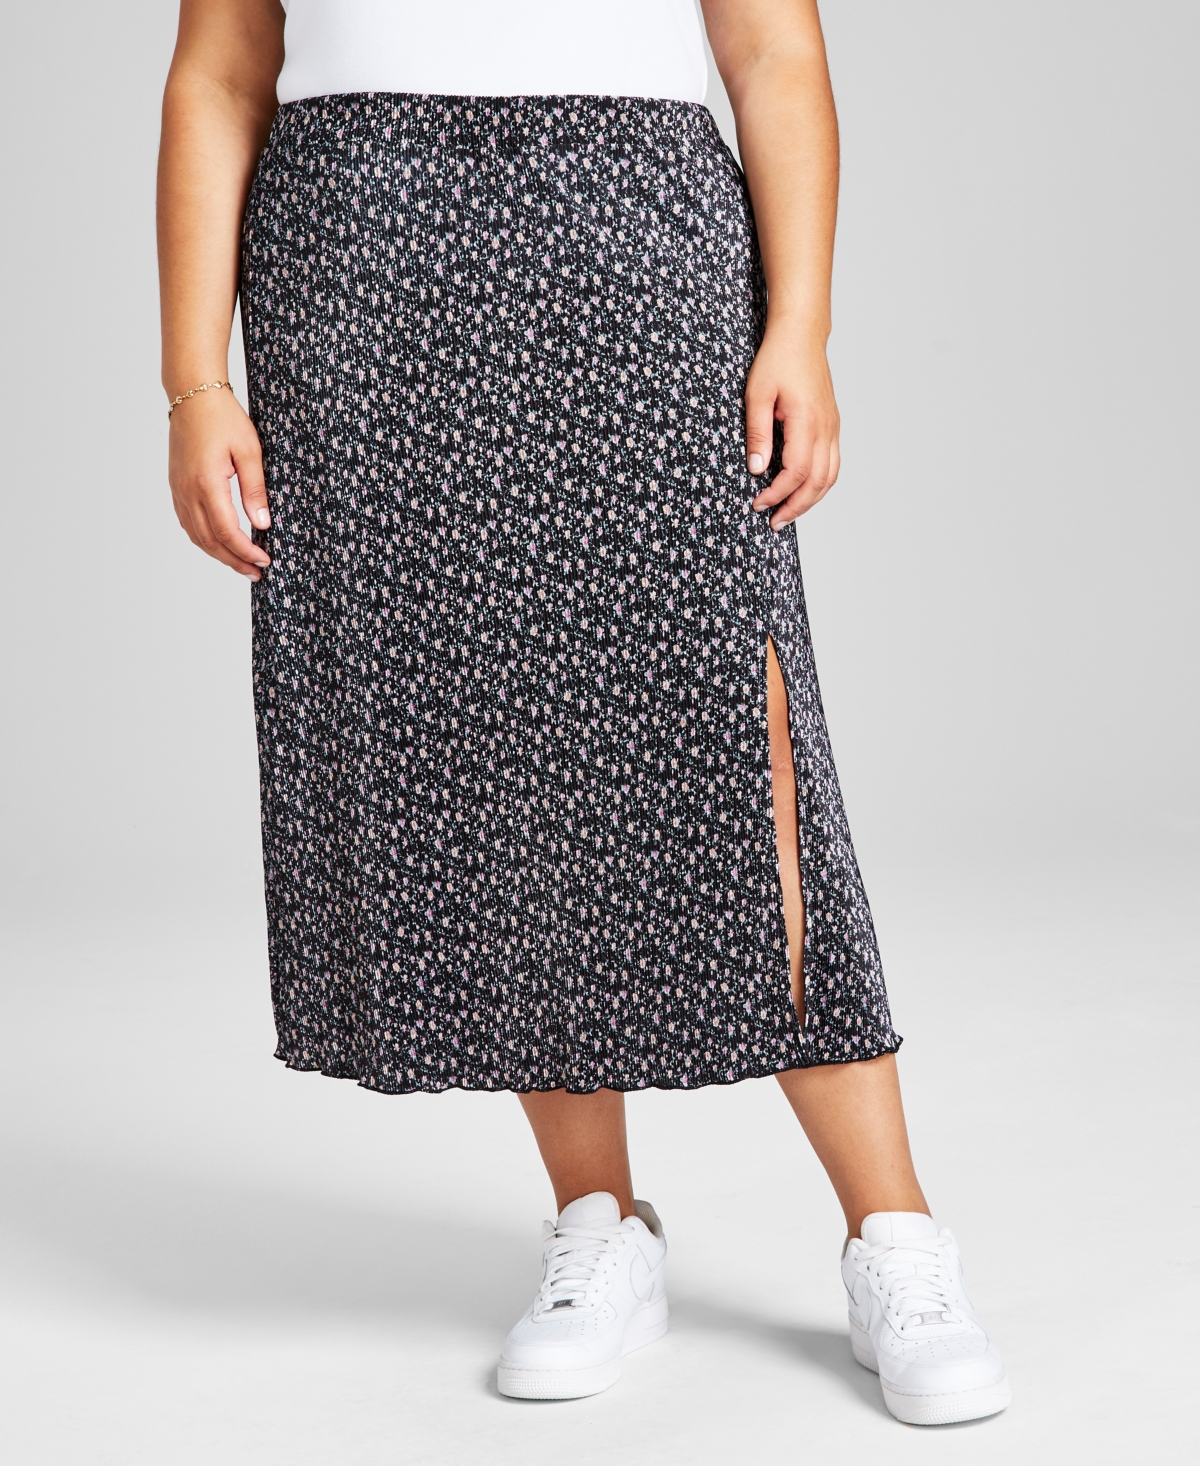 AND NOW THIS PLUS SIZE KNIT MIDI SKIRT